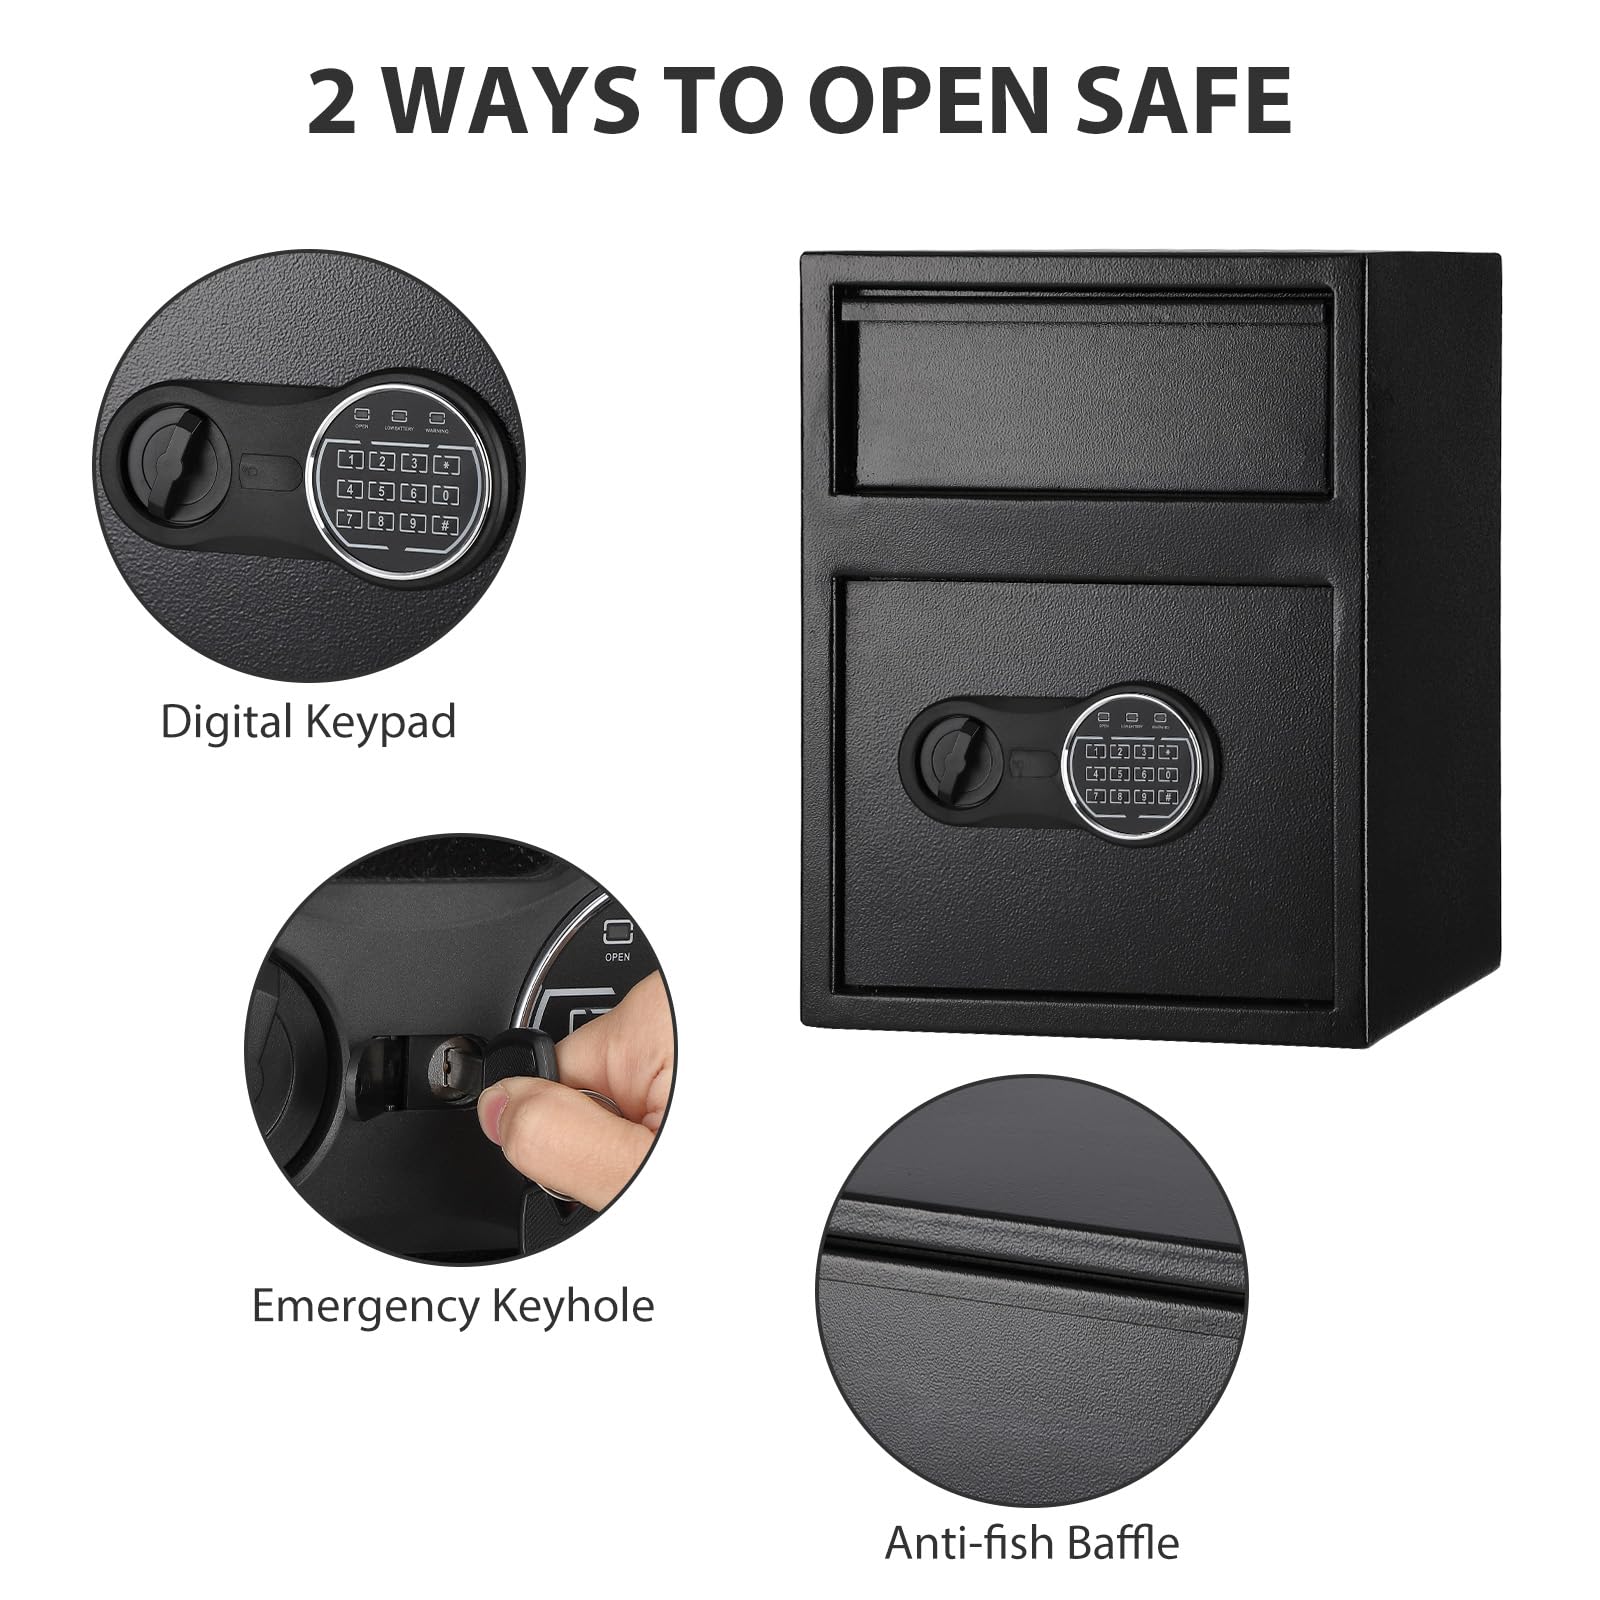 Depository Safe Digital Depository Safe Box, Electronic Steel Safe with Keypad, Locking Drop Box with Slot, Metal Lock Box with Two Emergency Keys for Your Valuables